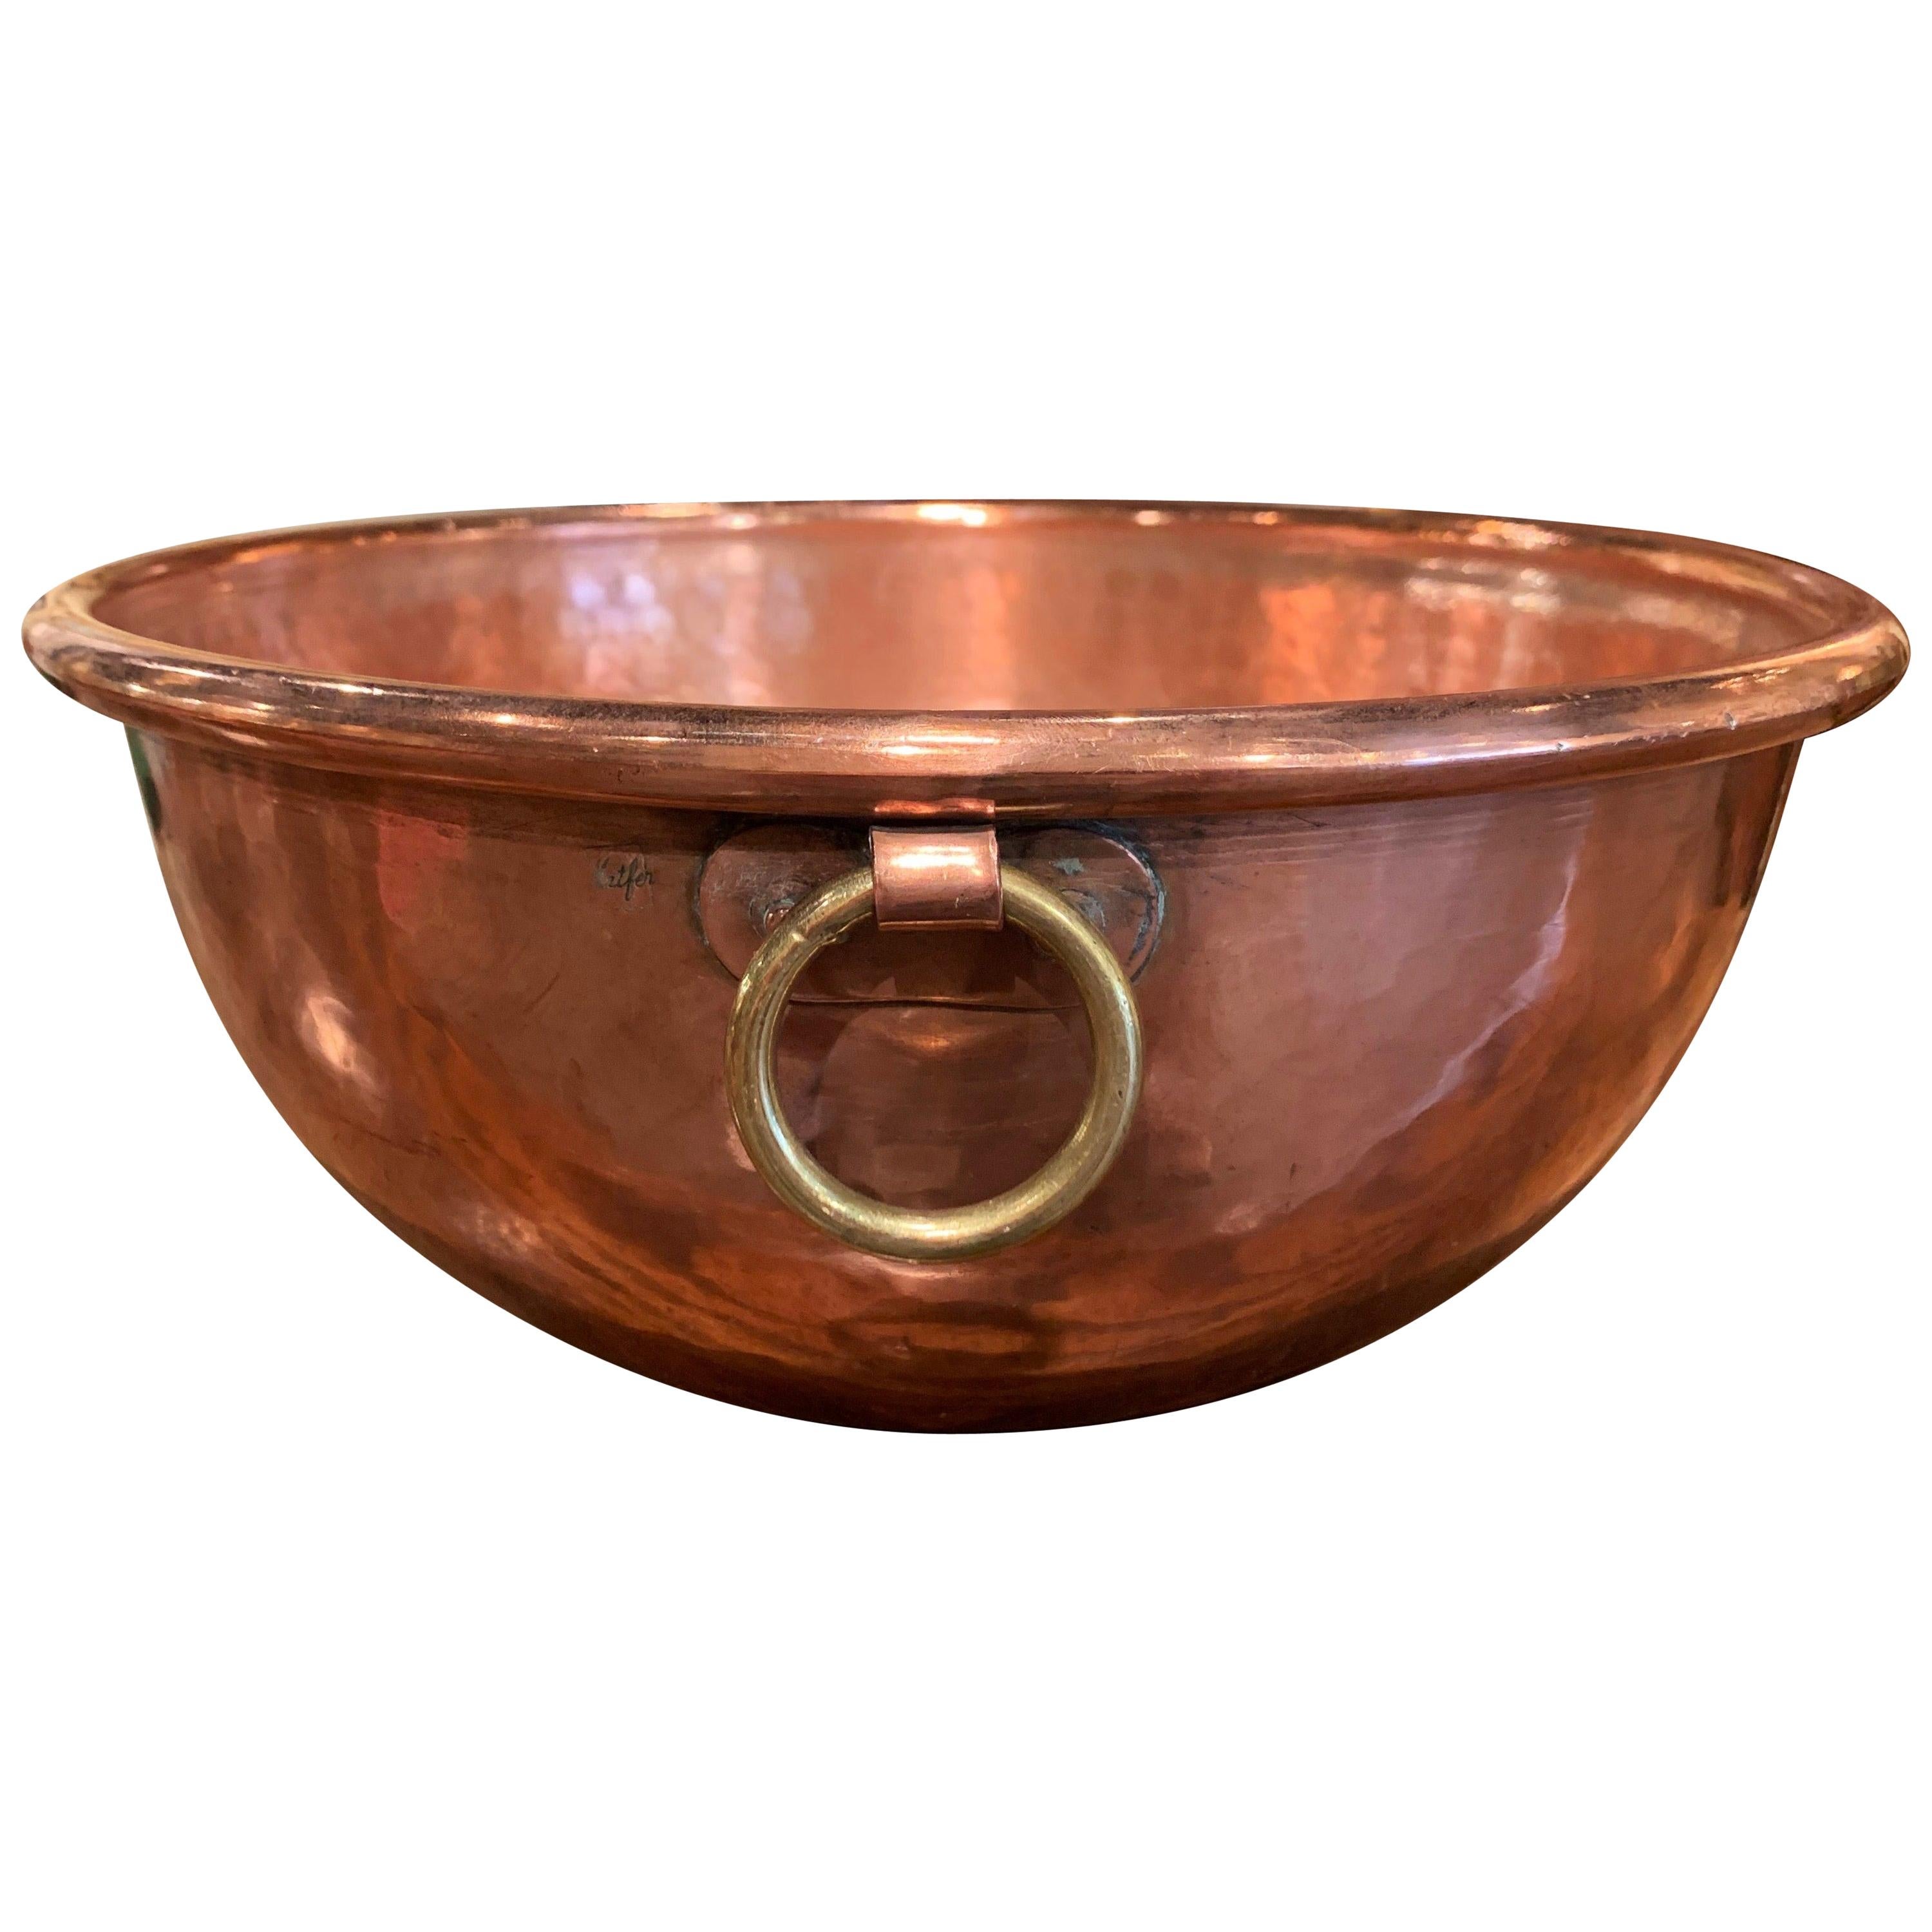 Mid-19th Century French Copper Jelly Bowl from Normandy